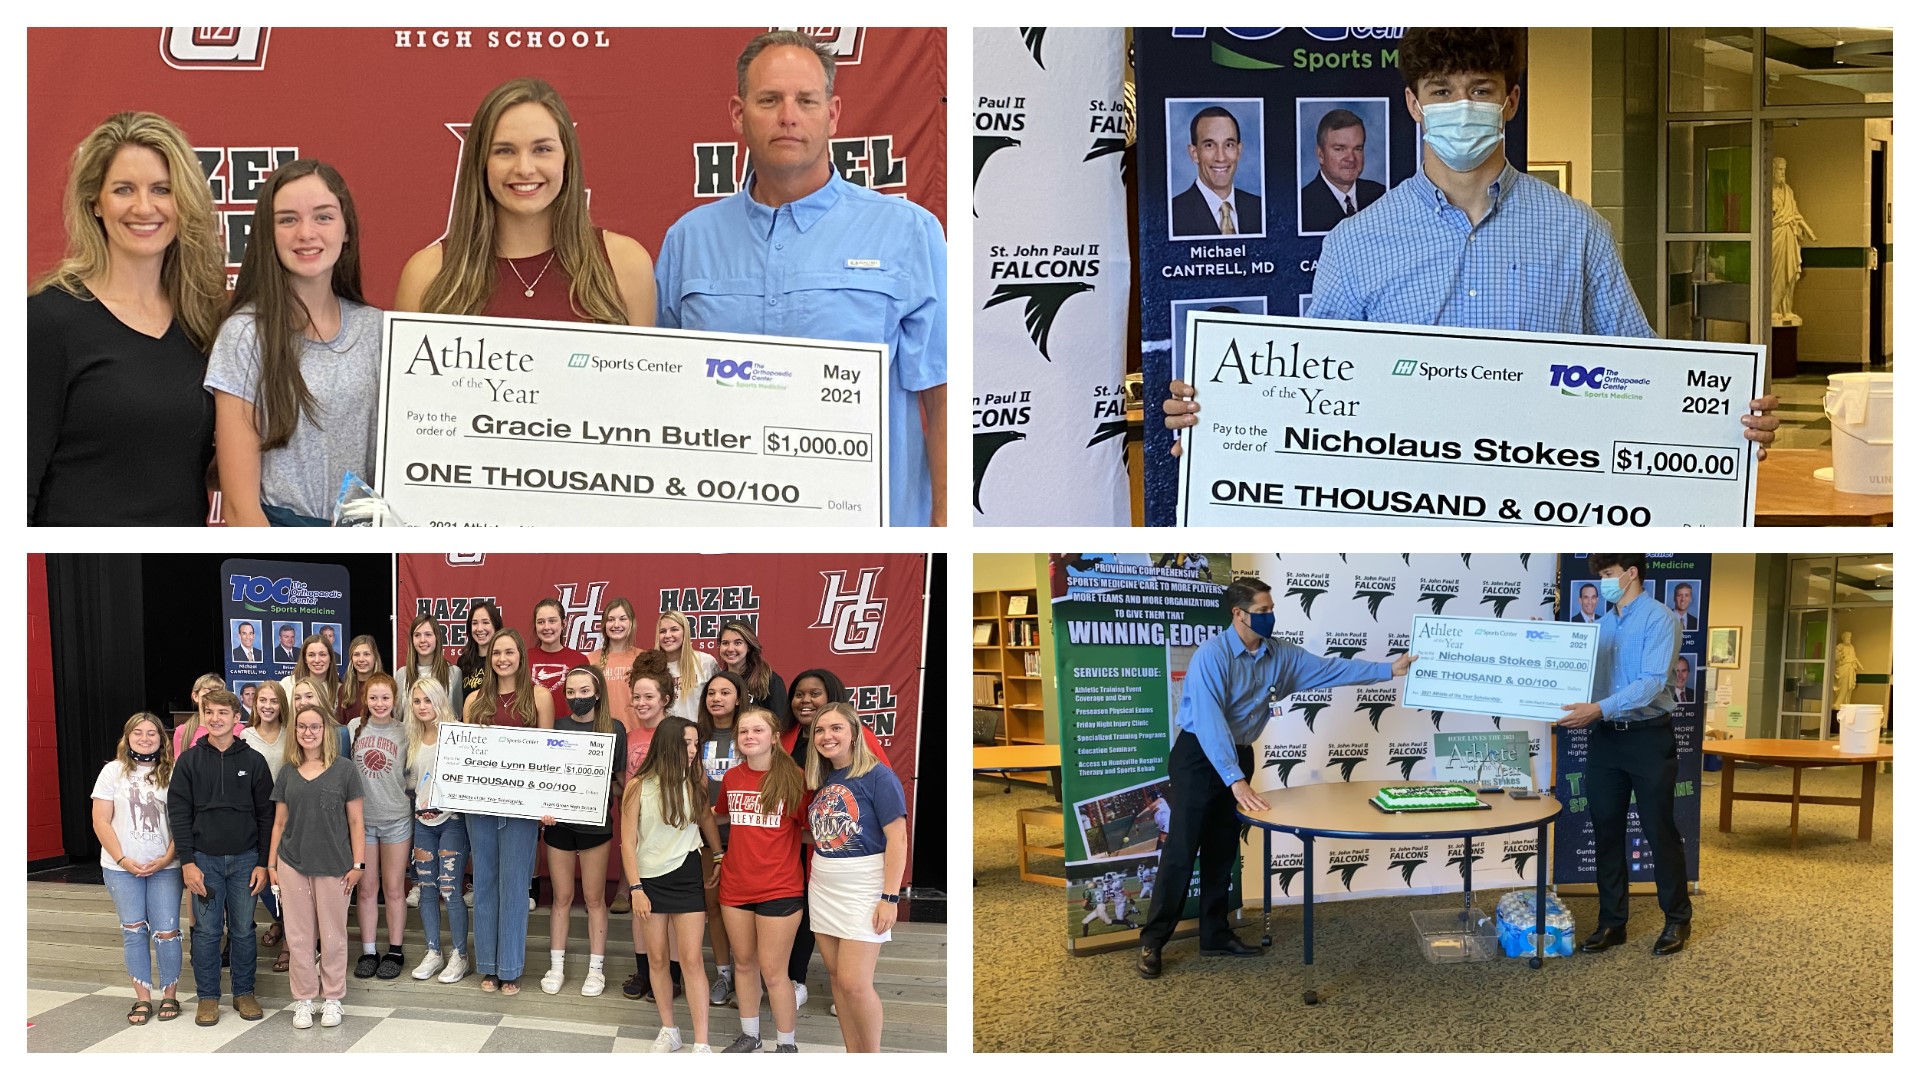 Gracie Lynn Butler & Nick Stokes won the 2021 Athletes of the Year Awards which are presented by Huntsville Hospital & TOC Sports